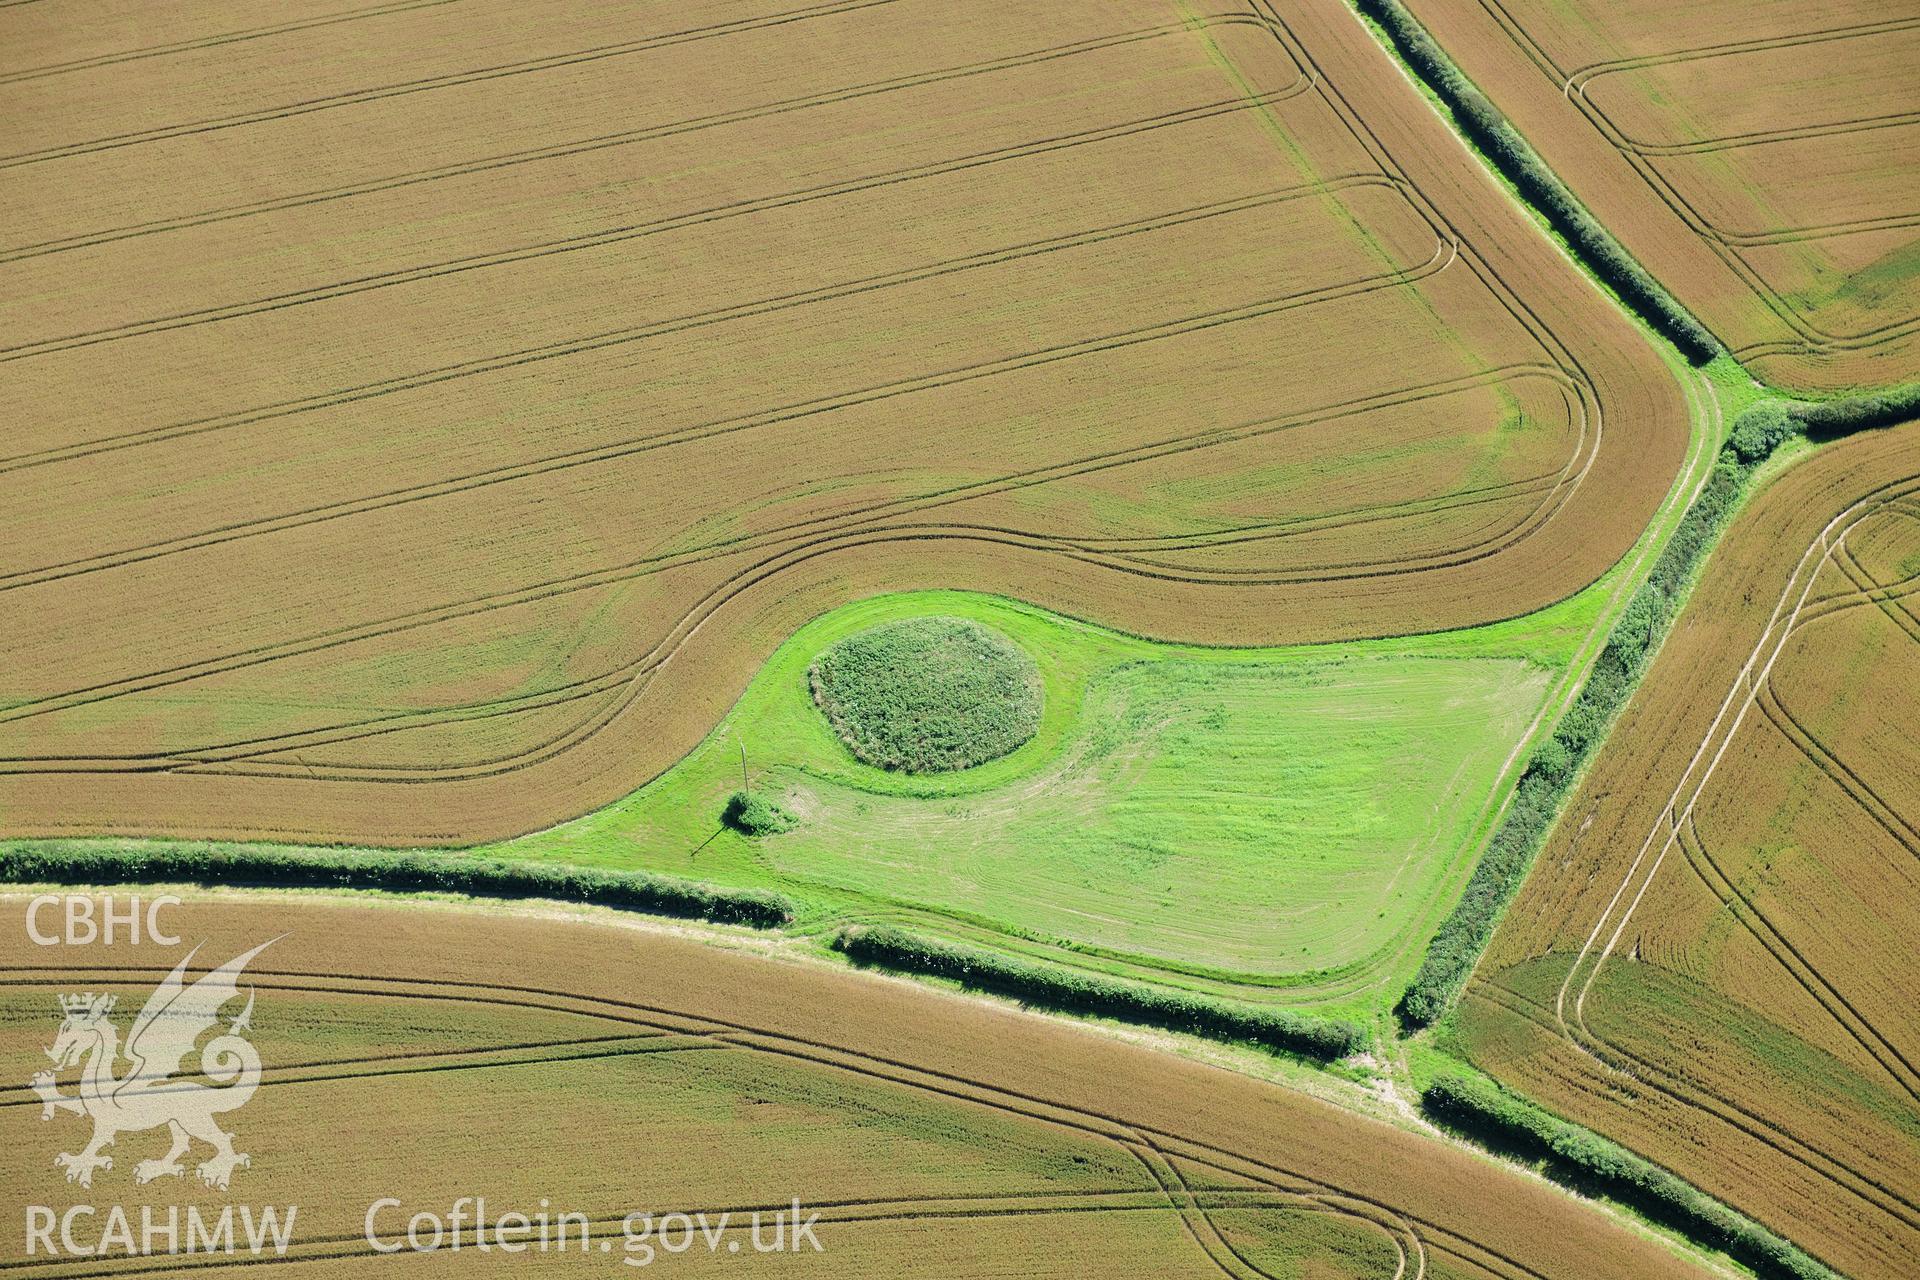 RCAHMW colour oblique photograph of Mynydd Herbert round barrow. Taken by Toby Driver on 24/07/2012.